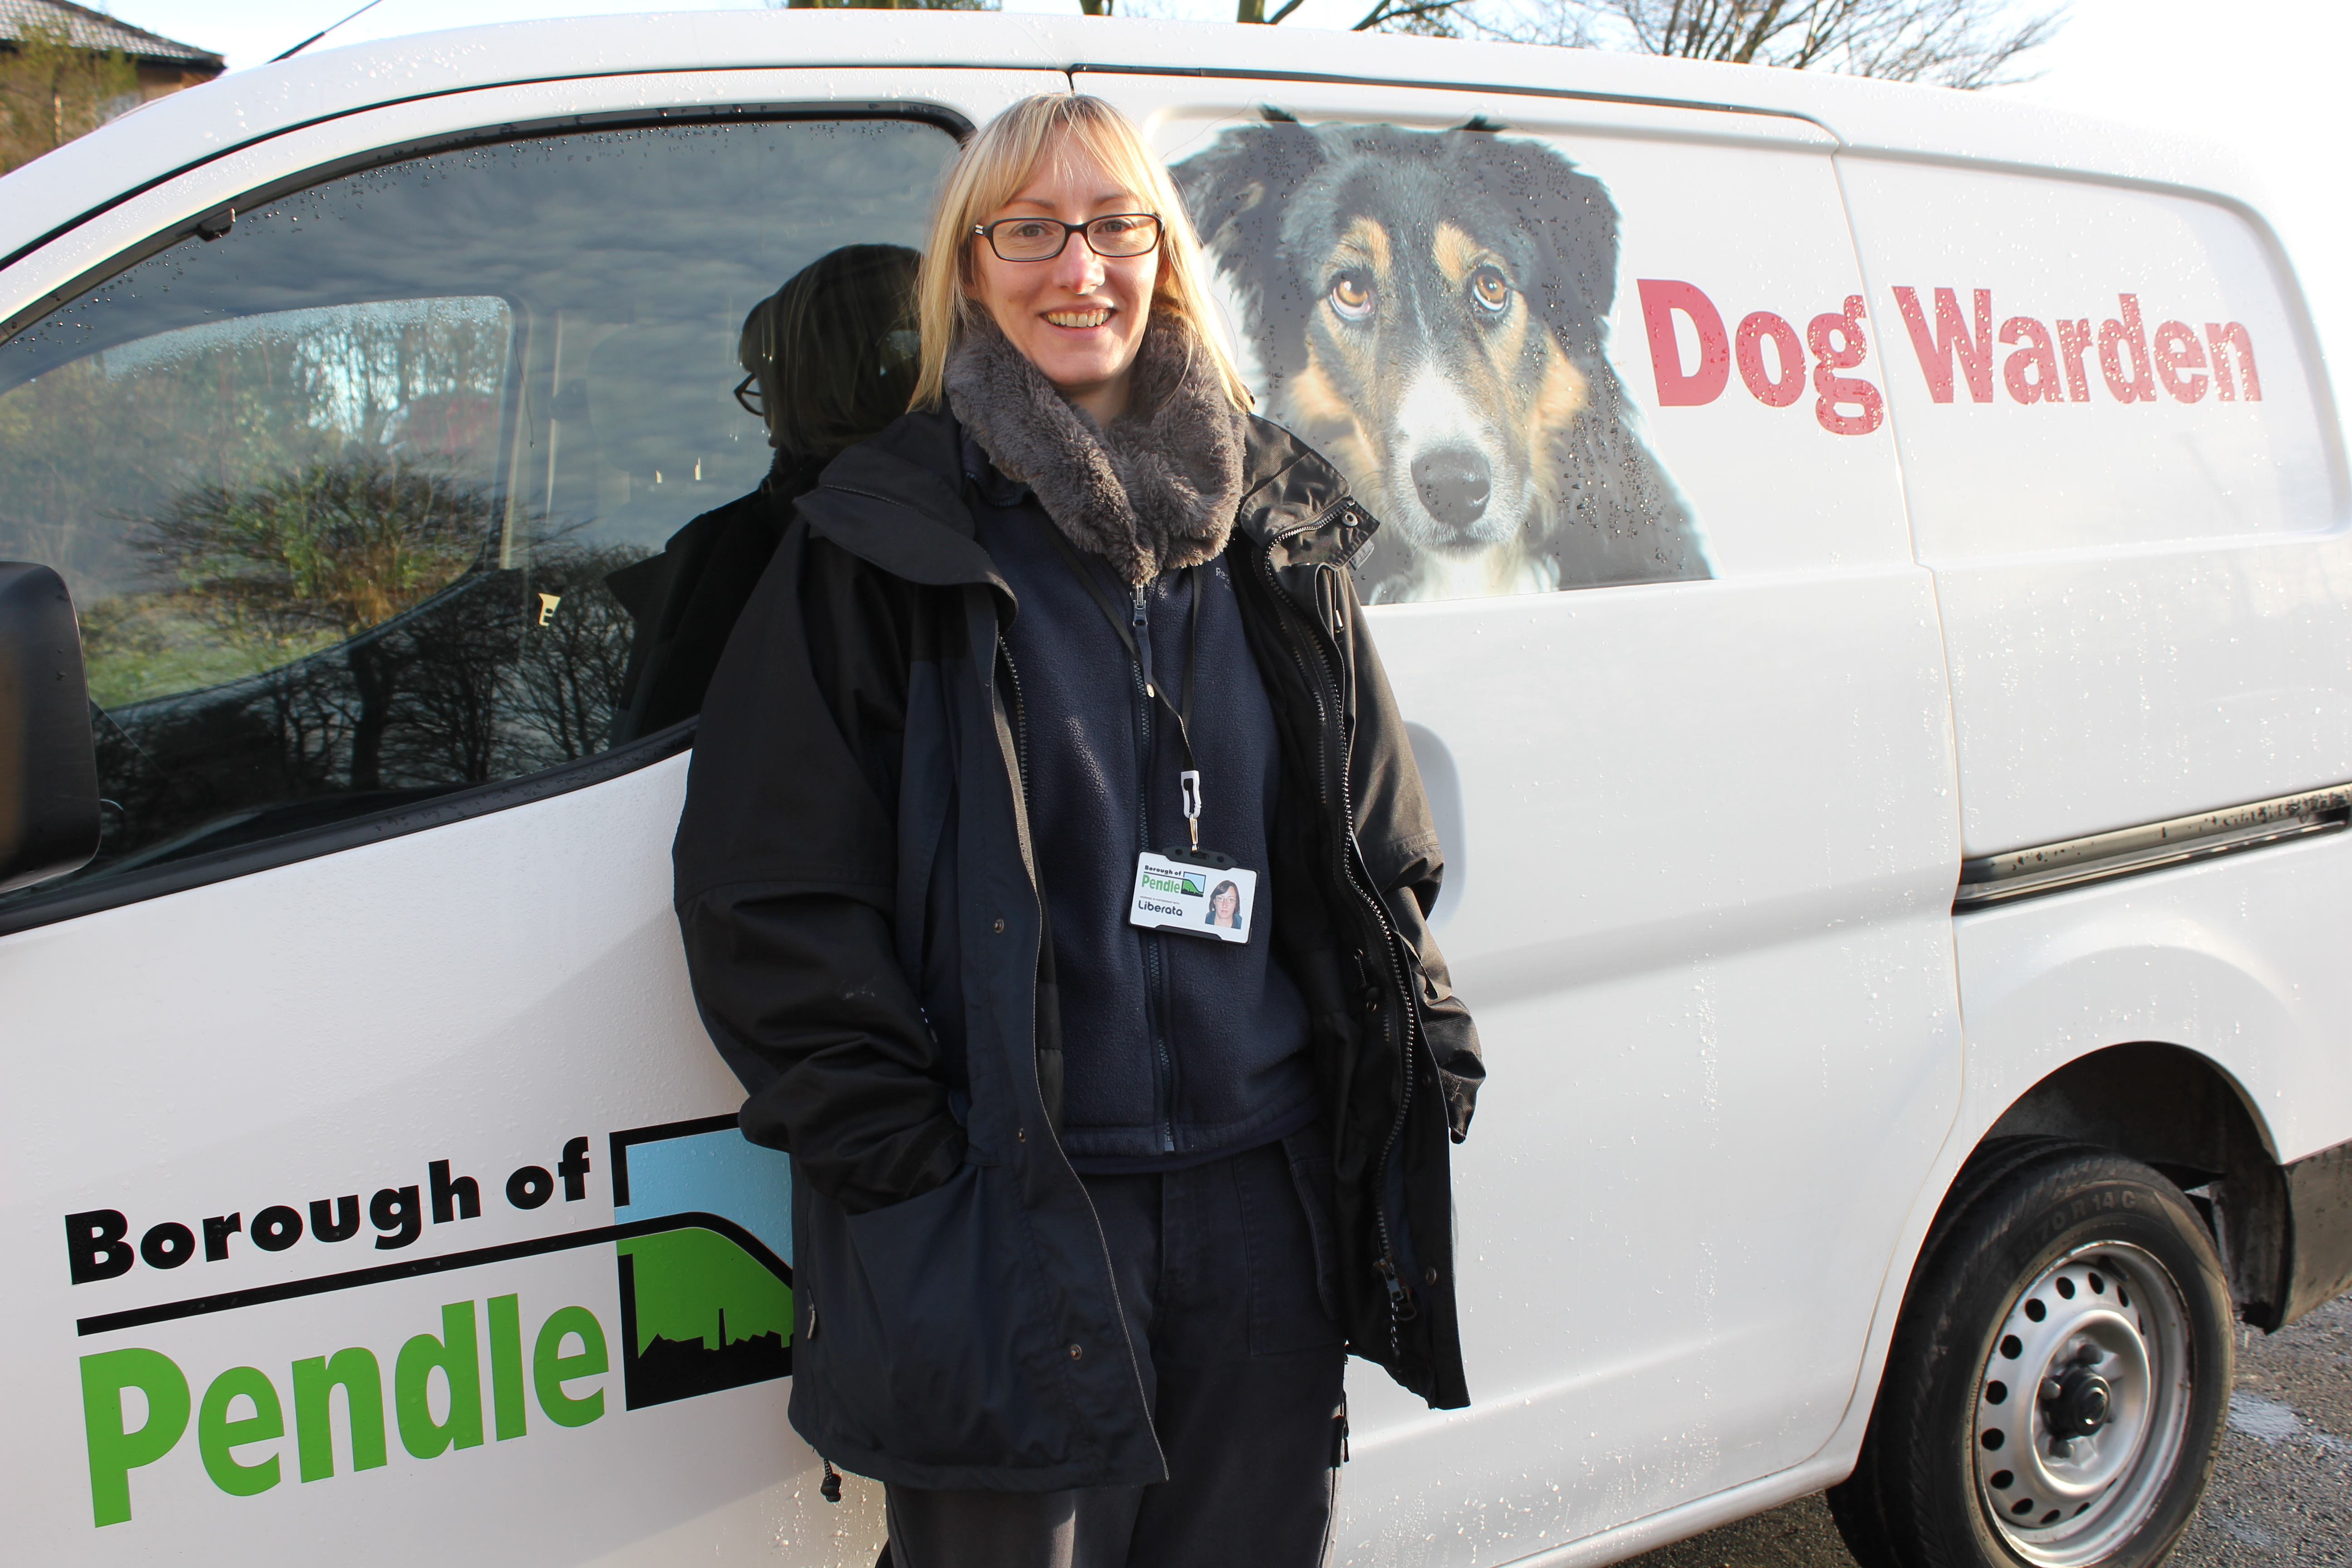 Free event to keep Pendle dog owners within the law